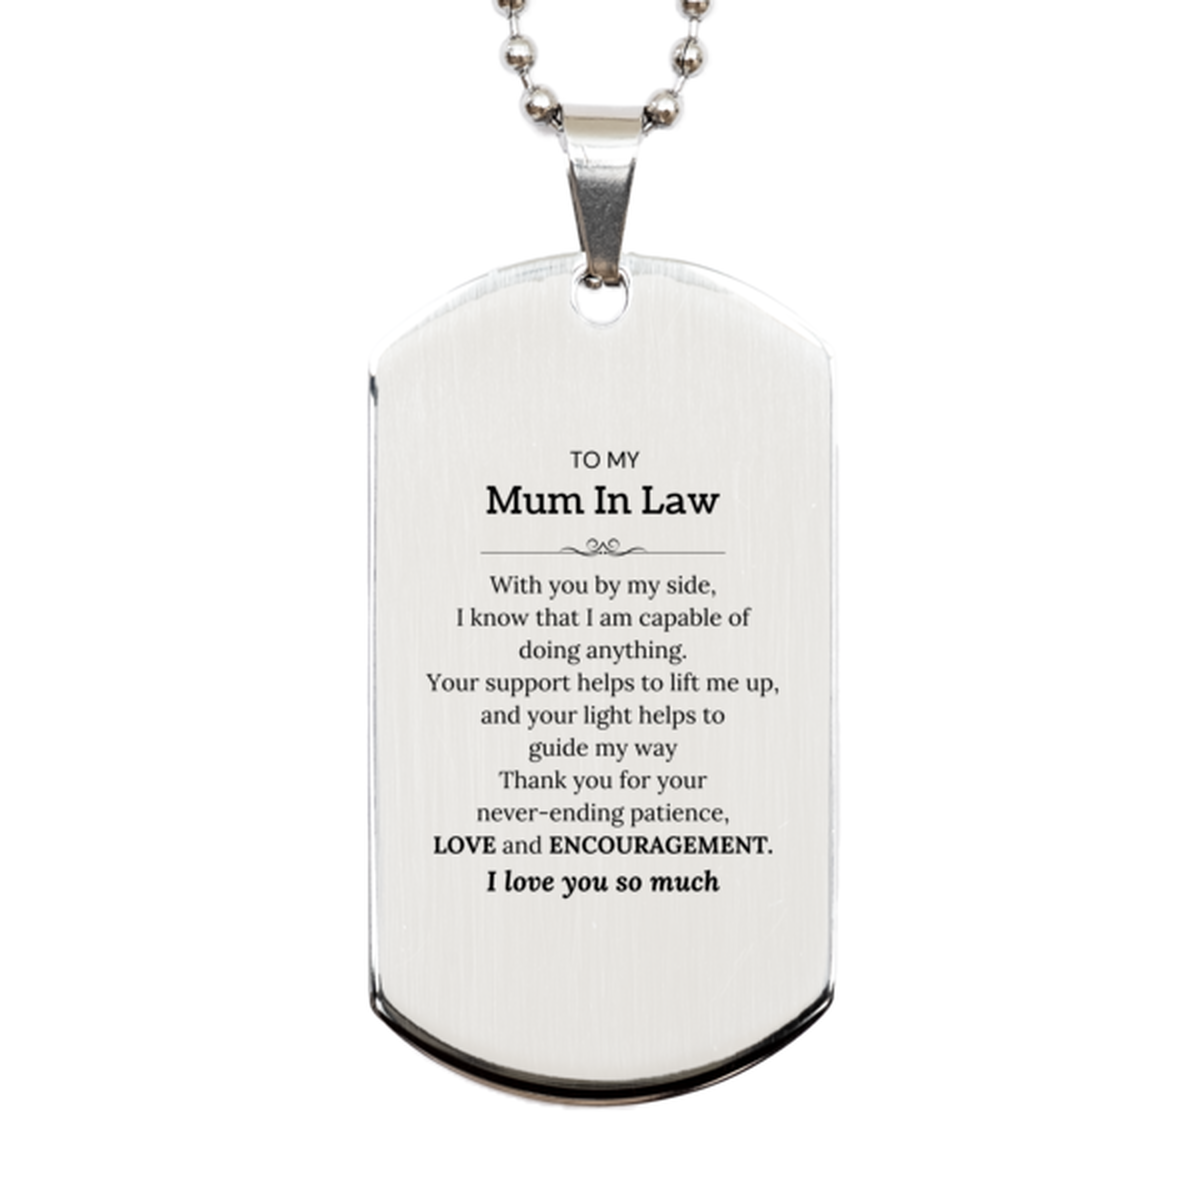 Appreciation Mum In Law  Silver Dog Tag Gifts, To My Mum In Law  Birthday Christmas Wedding Keepsake Gifts for Mum In Law  With you by my side, I know that I am capable of doing anything. I love you so much